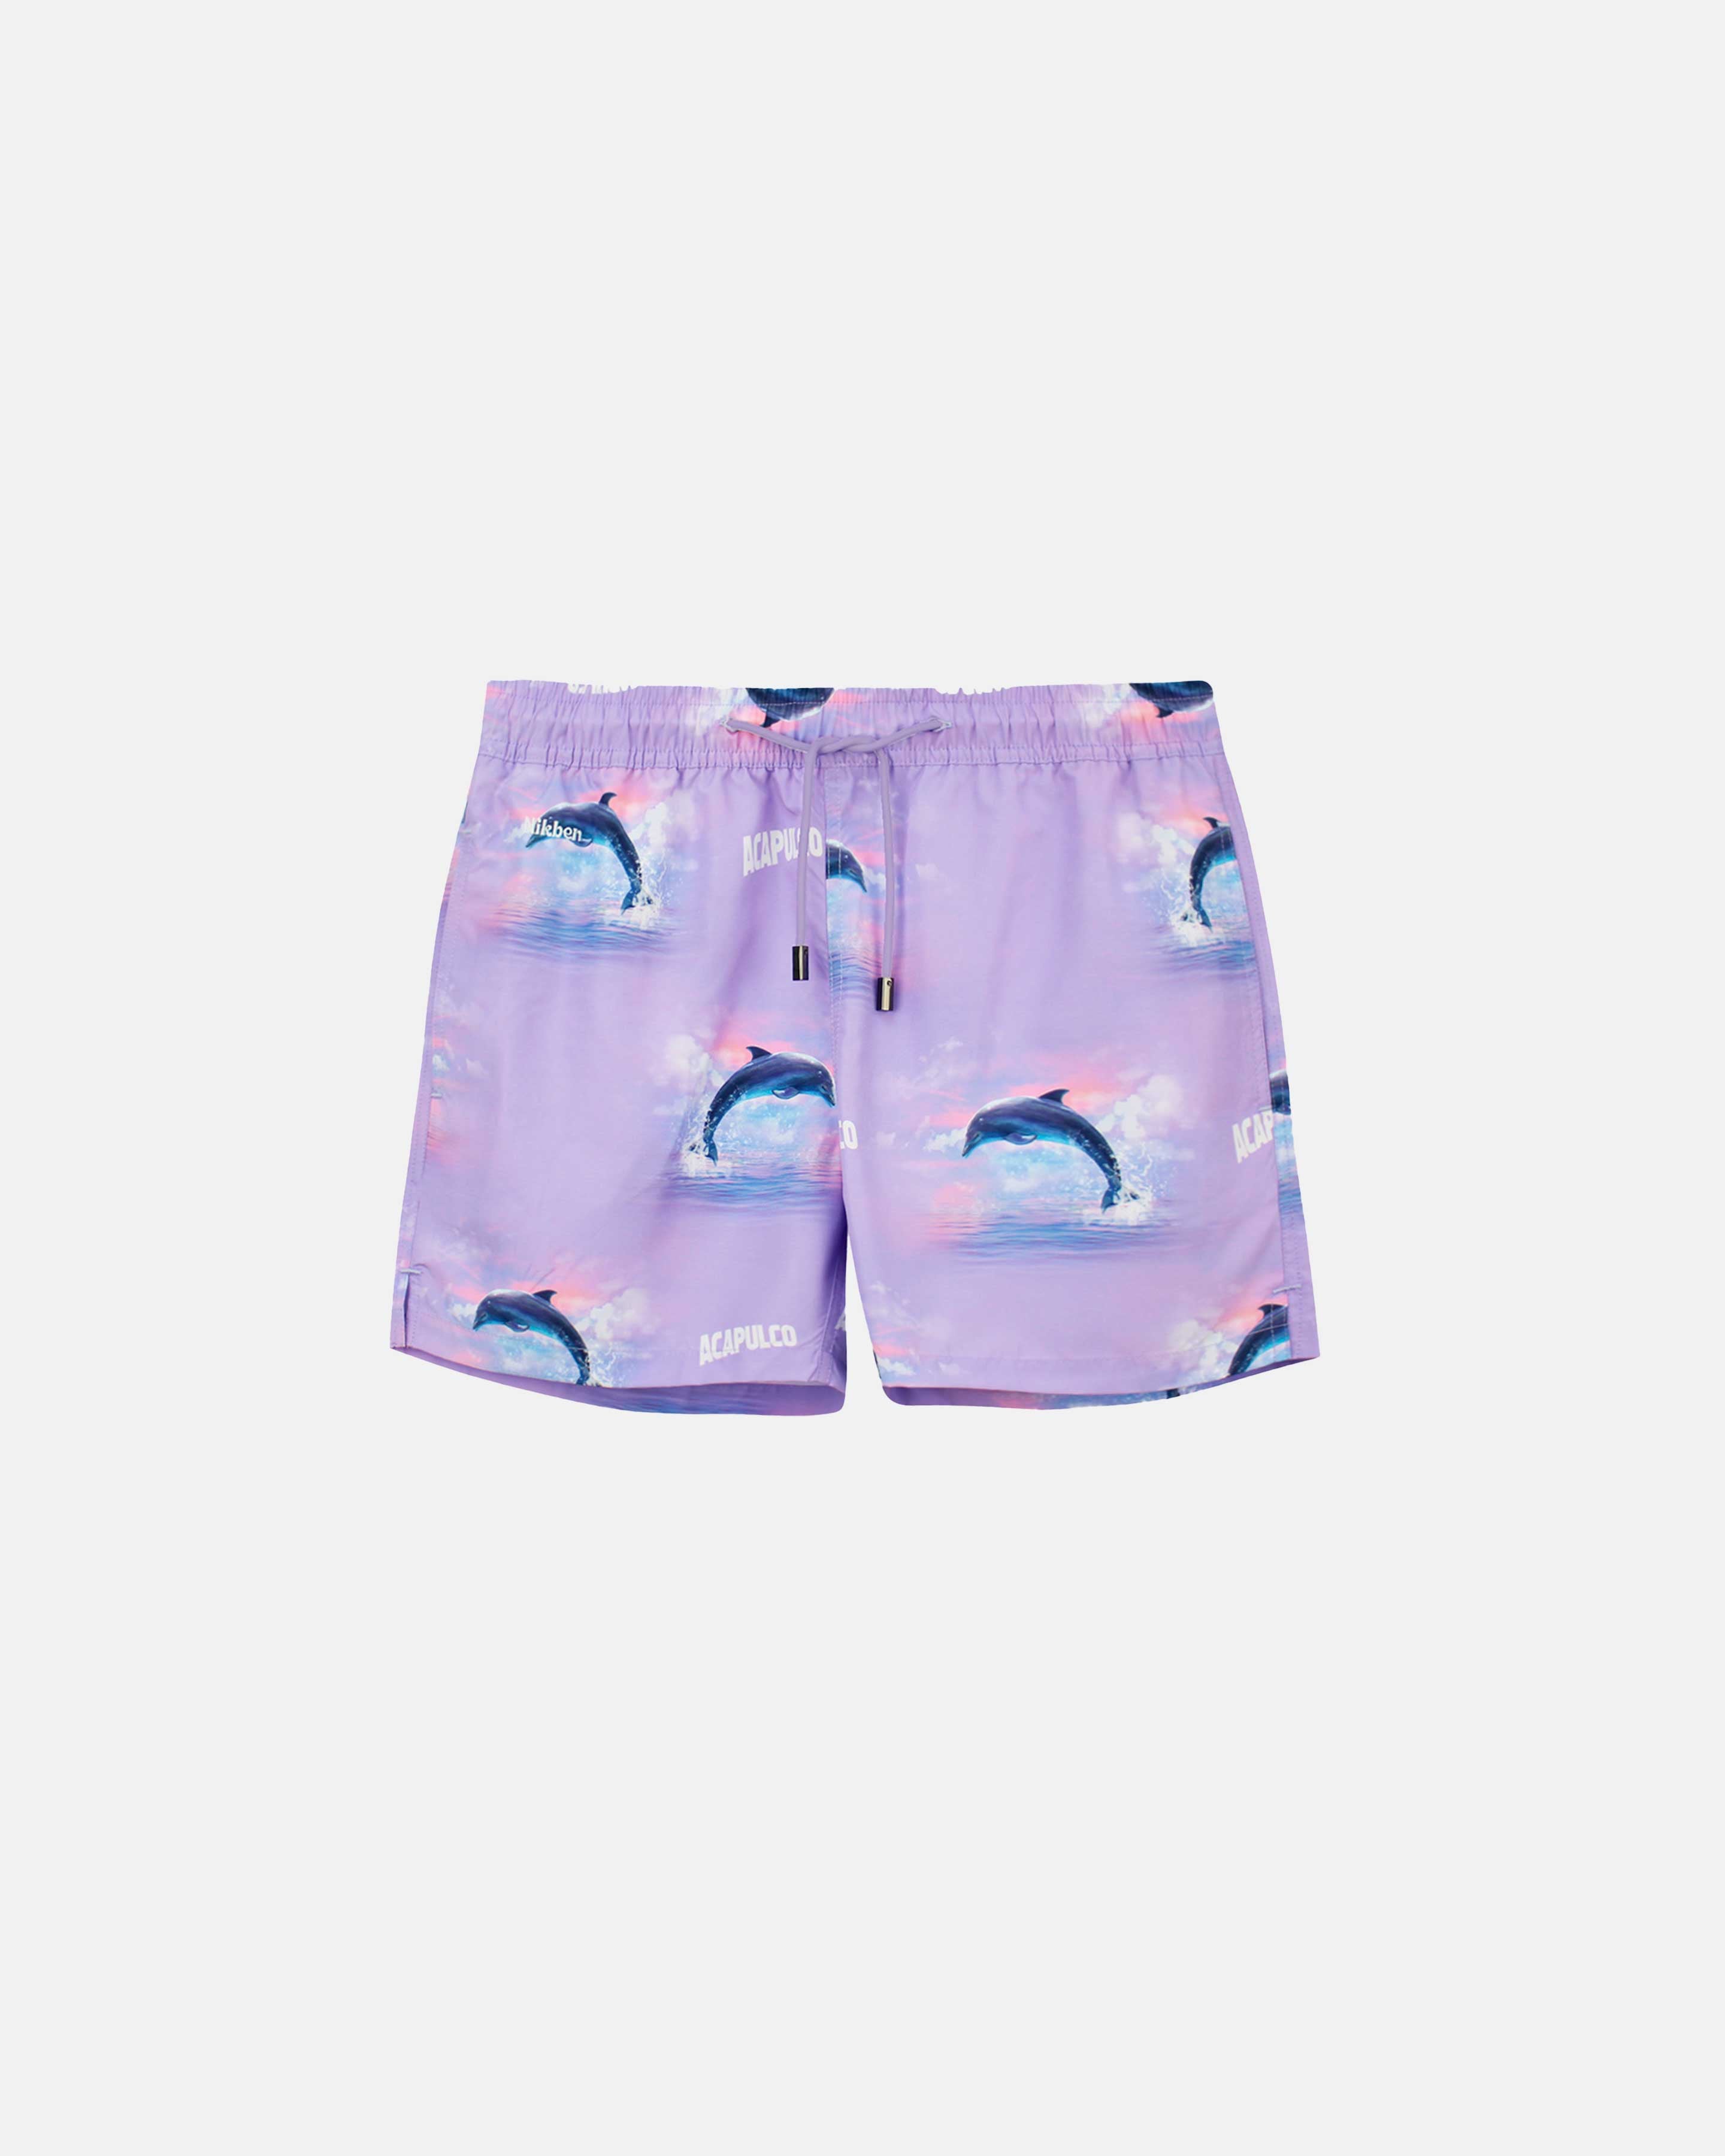 Purple swim trunks with dolphin print. Mid length shorts with drawstring waistband and two side pockets.